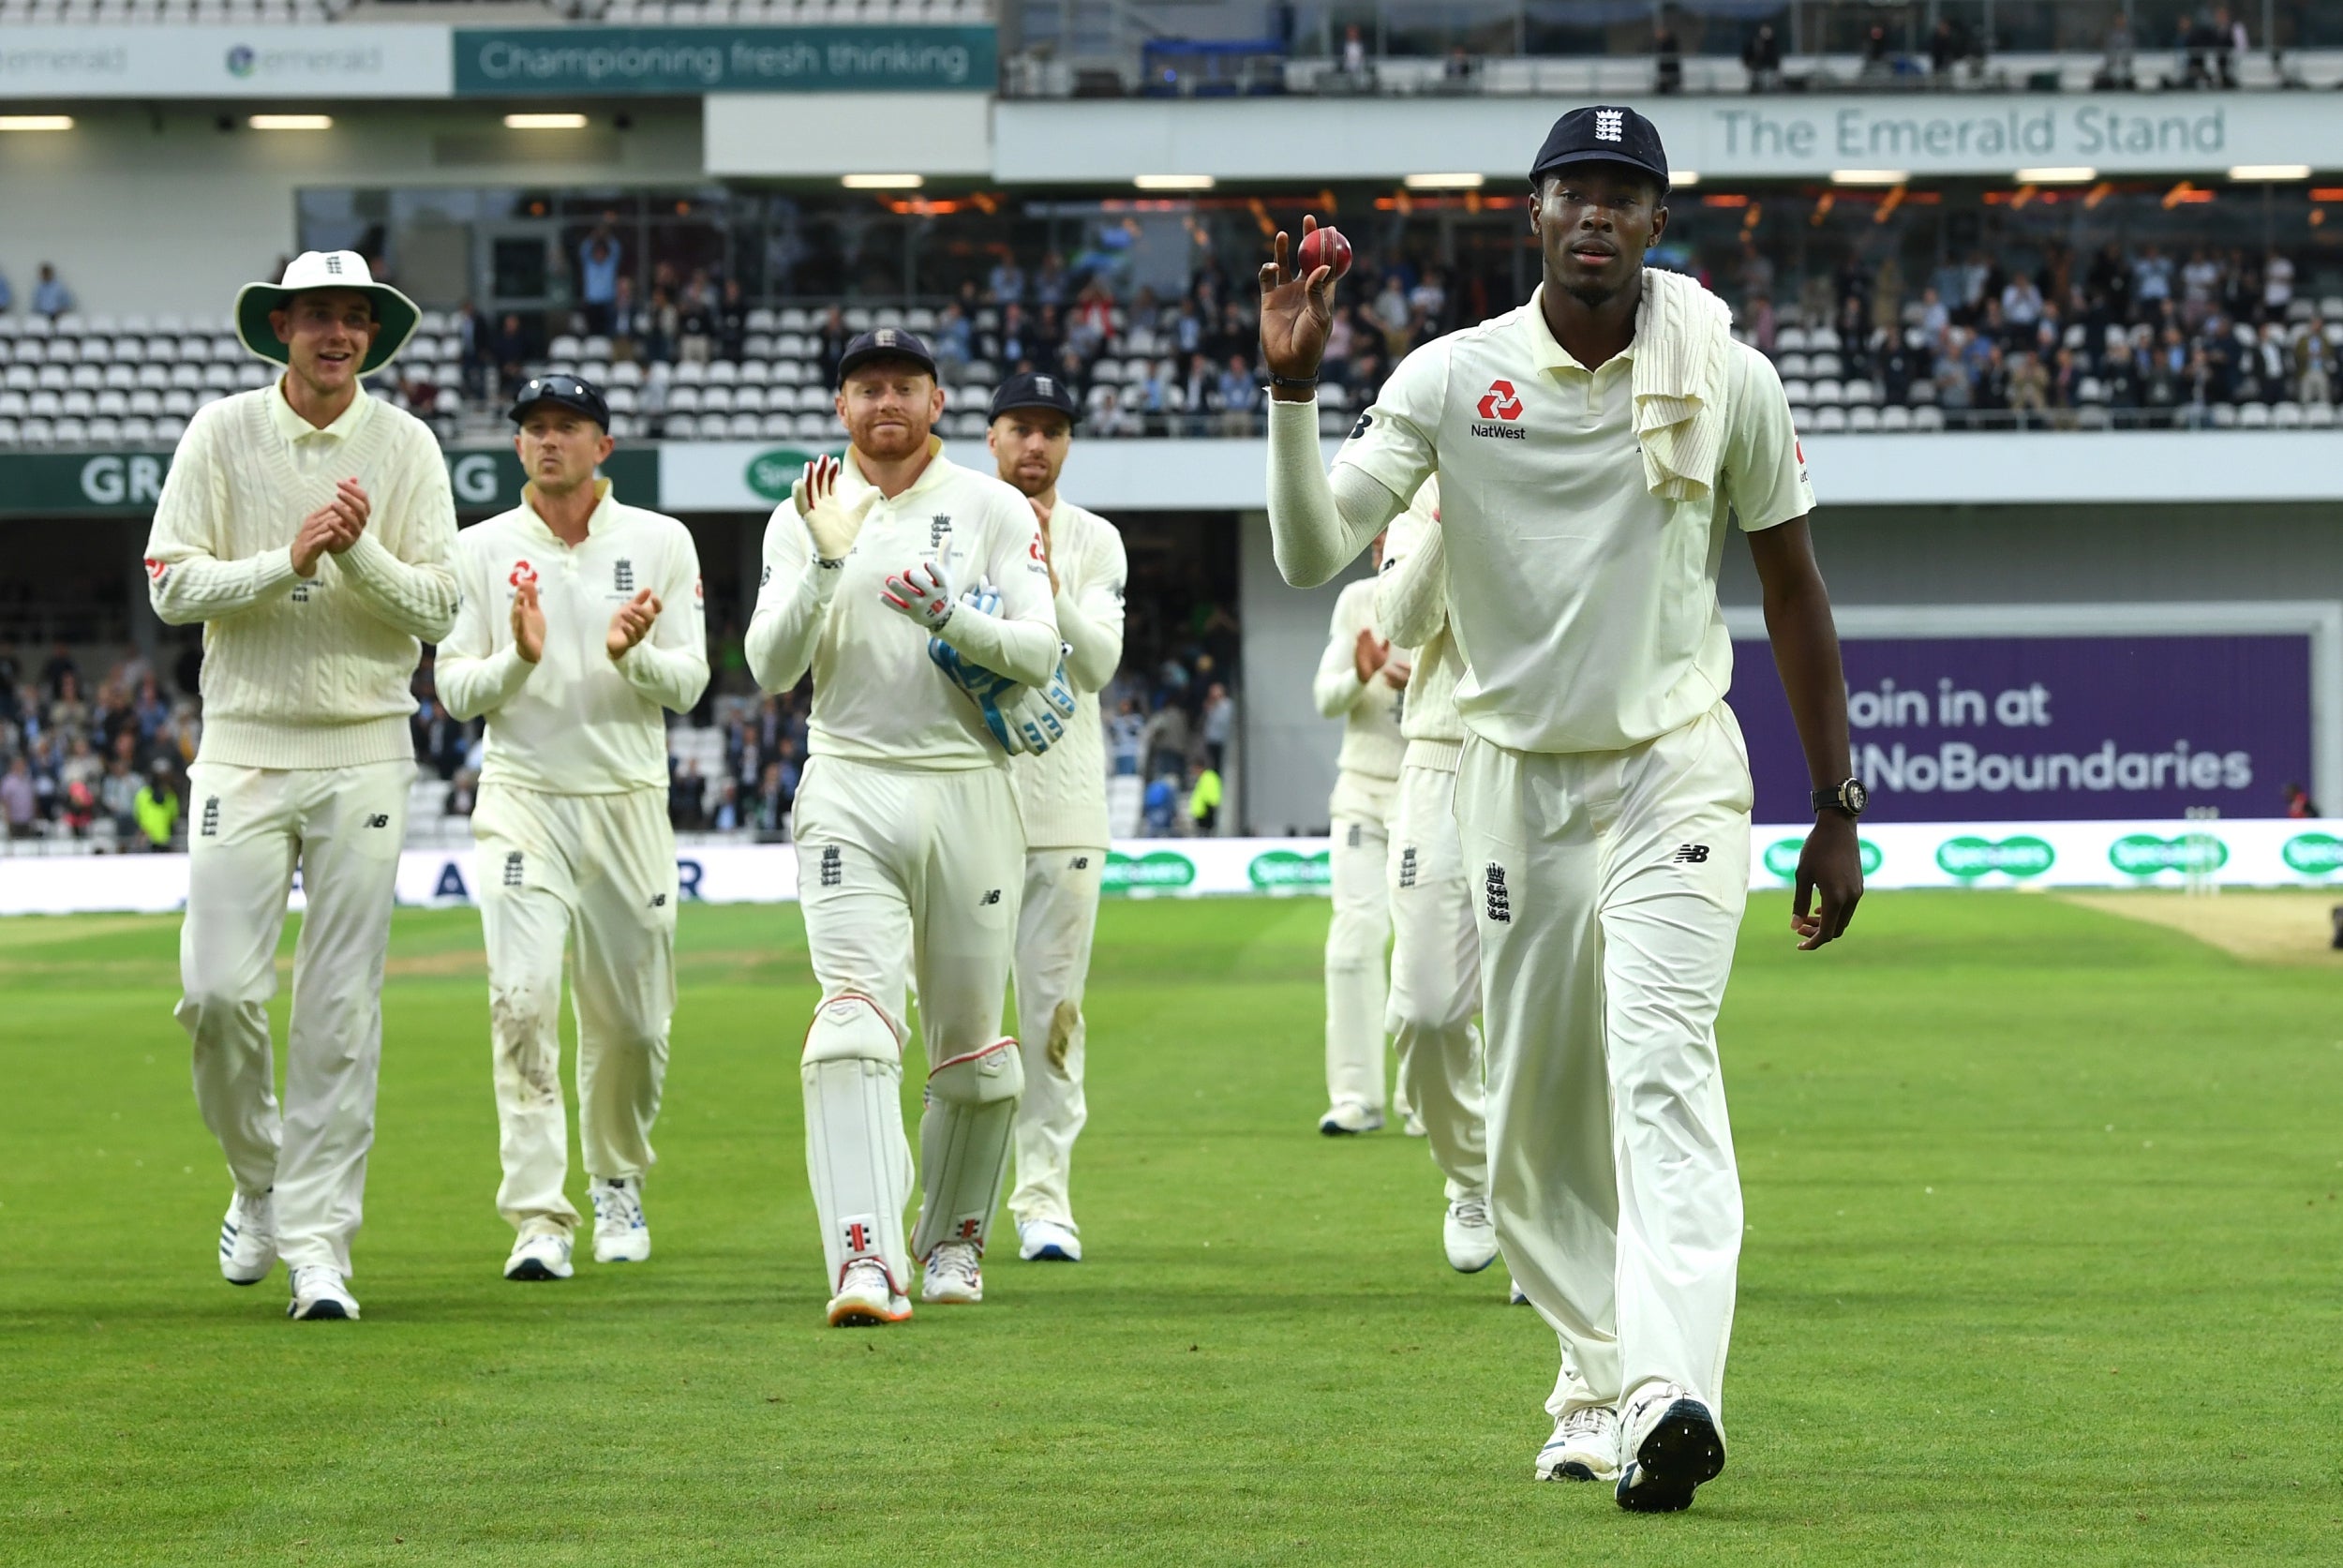 Ashes 2019: Jofra Archer 'over the moon' after taking six Australian wickets to put England in control